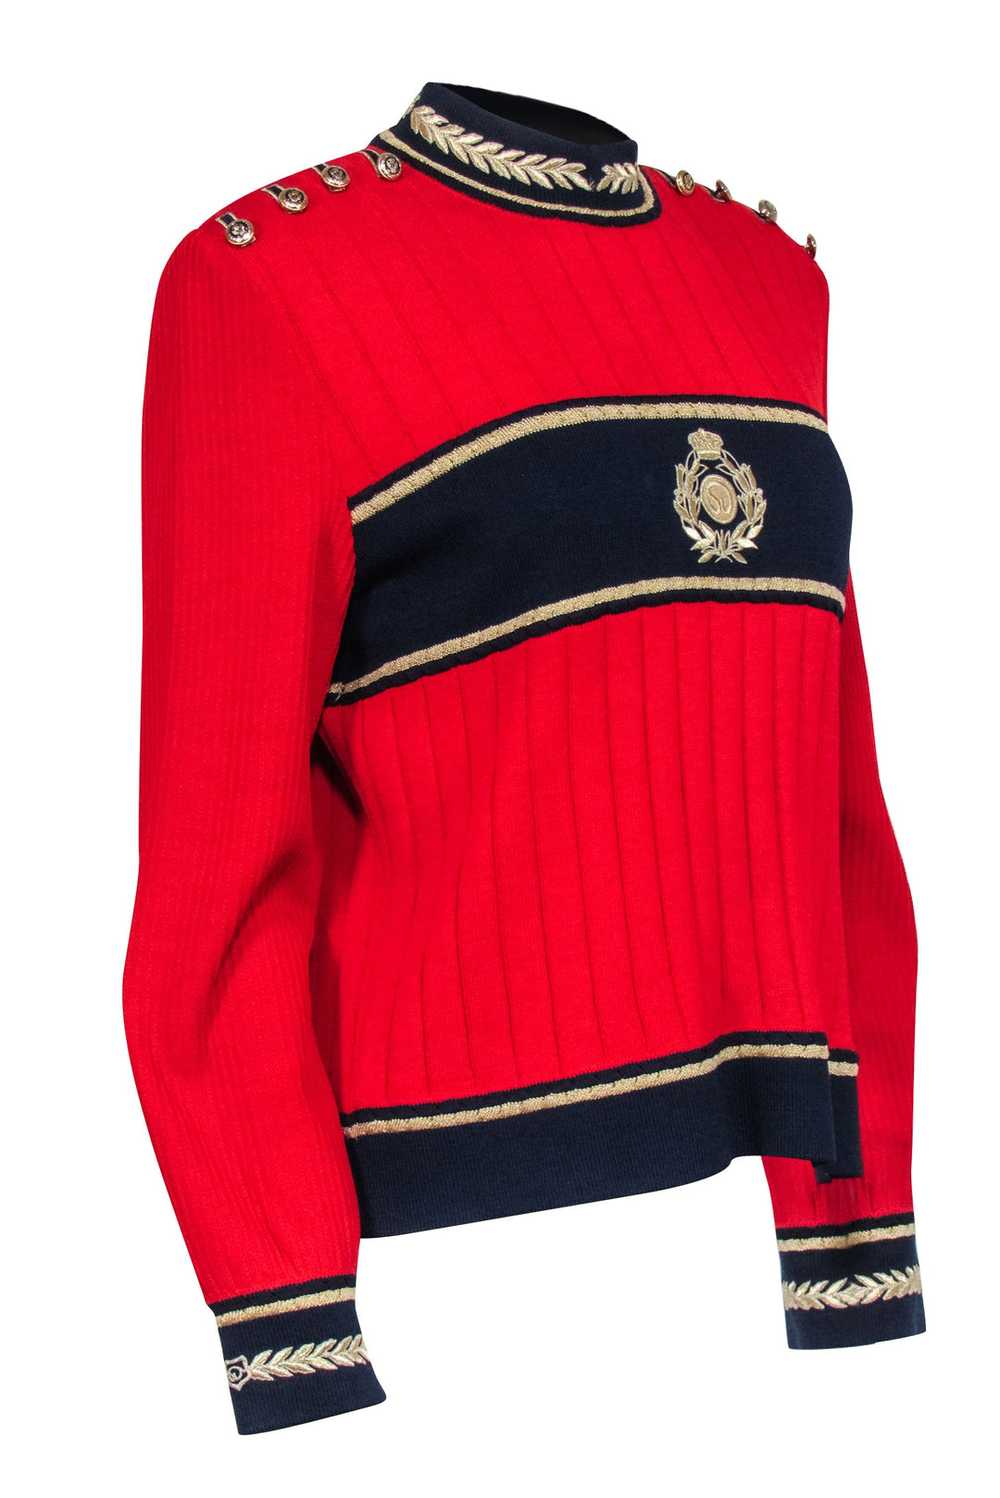 St. John - Red Knit Sweater w/ Gold & Navy Detail… - image 2